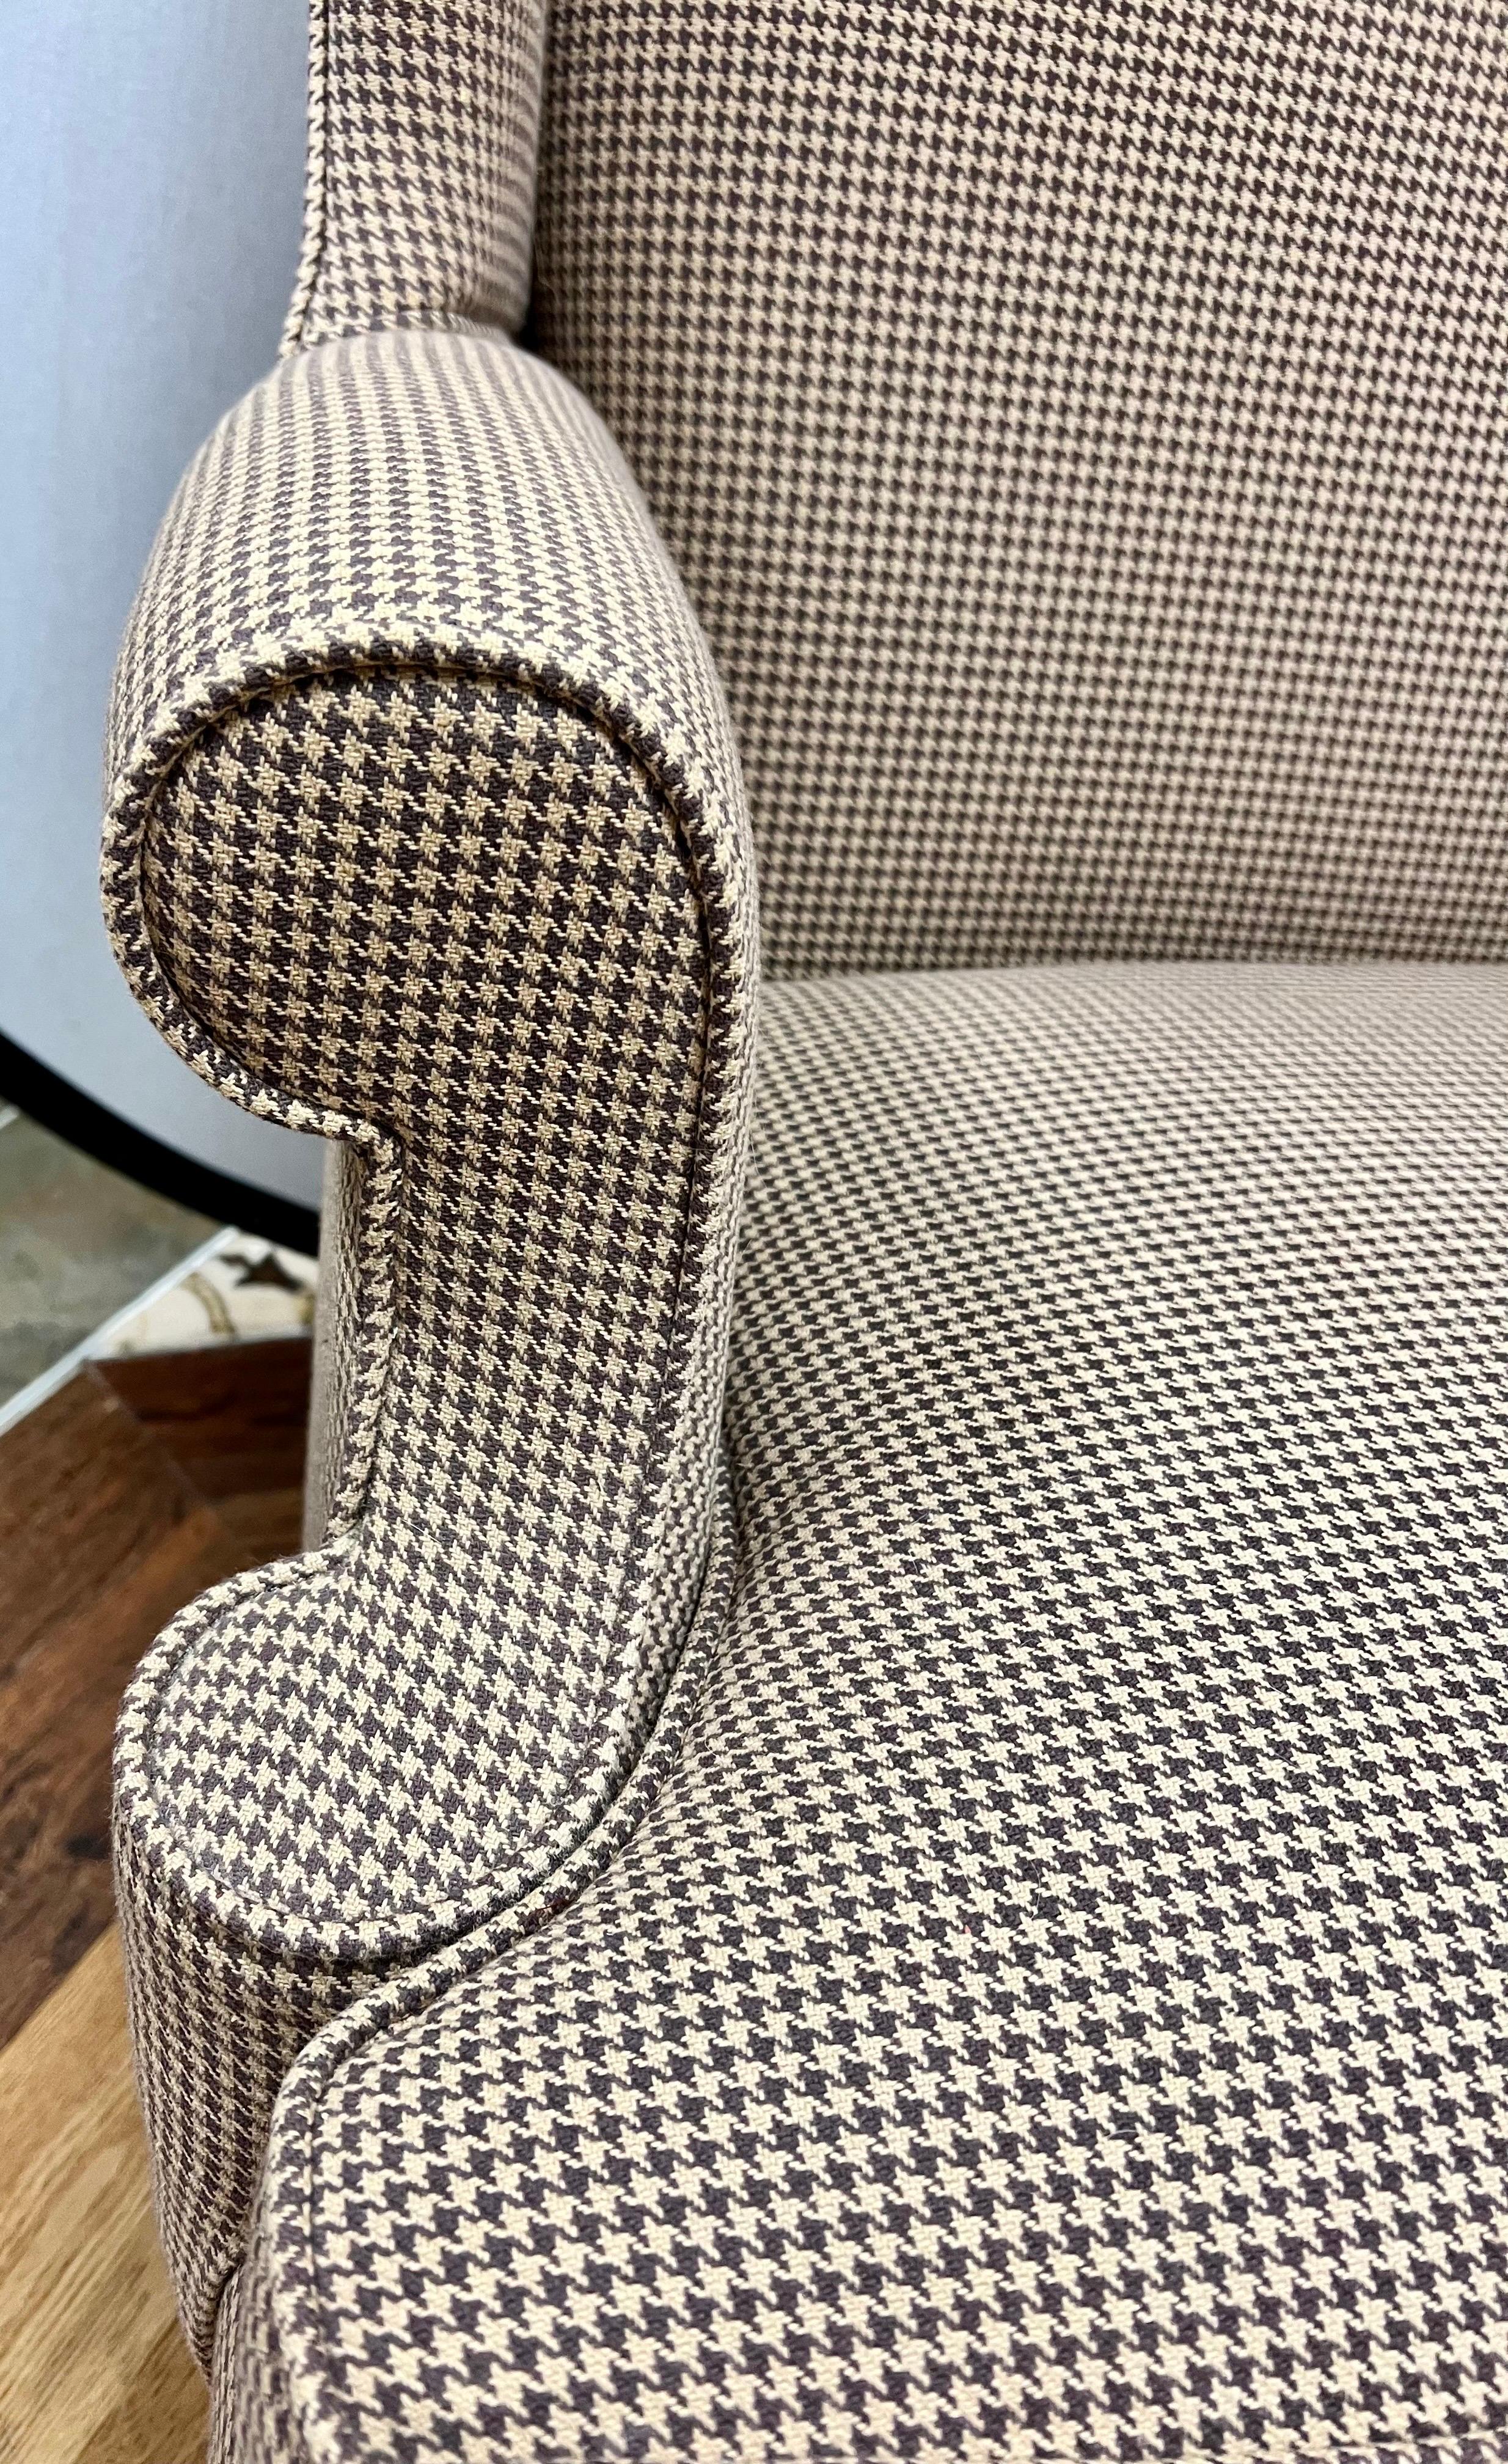 houndstooth wingback chair